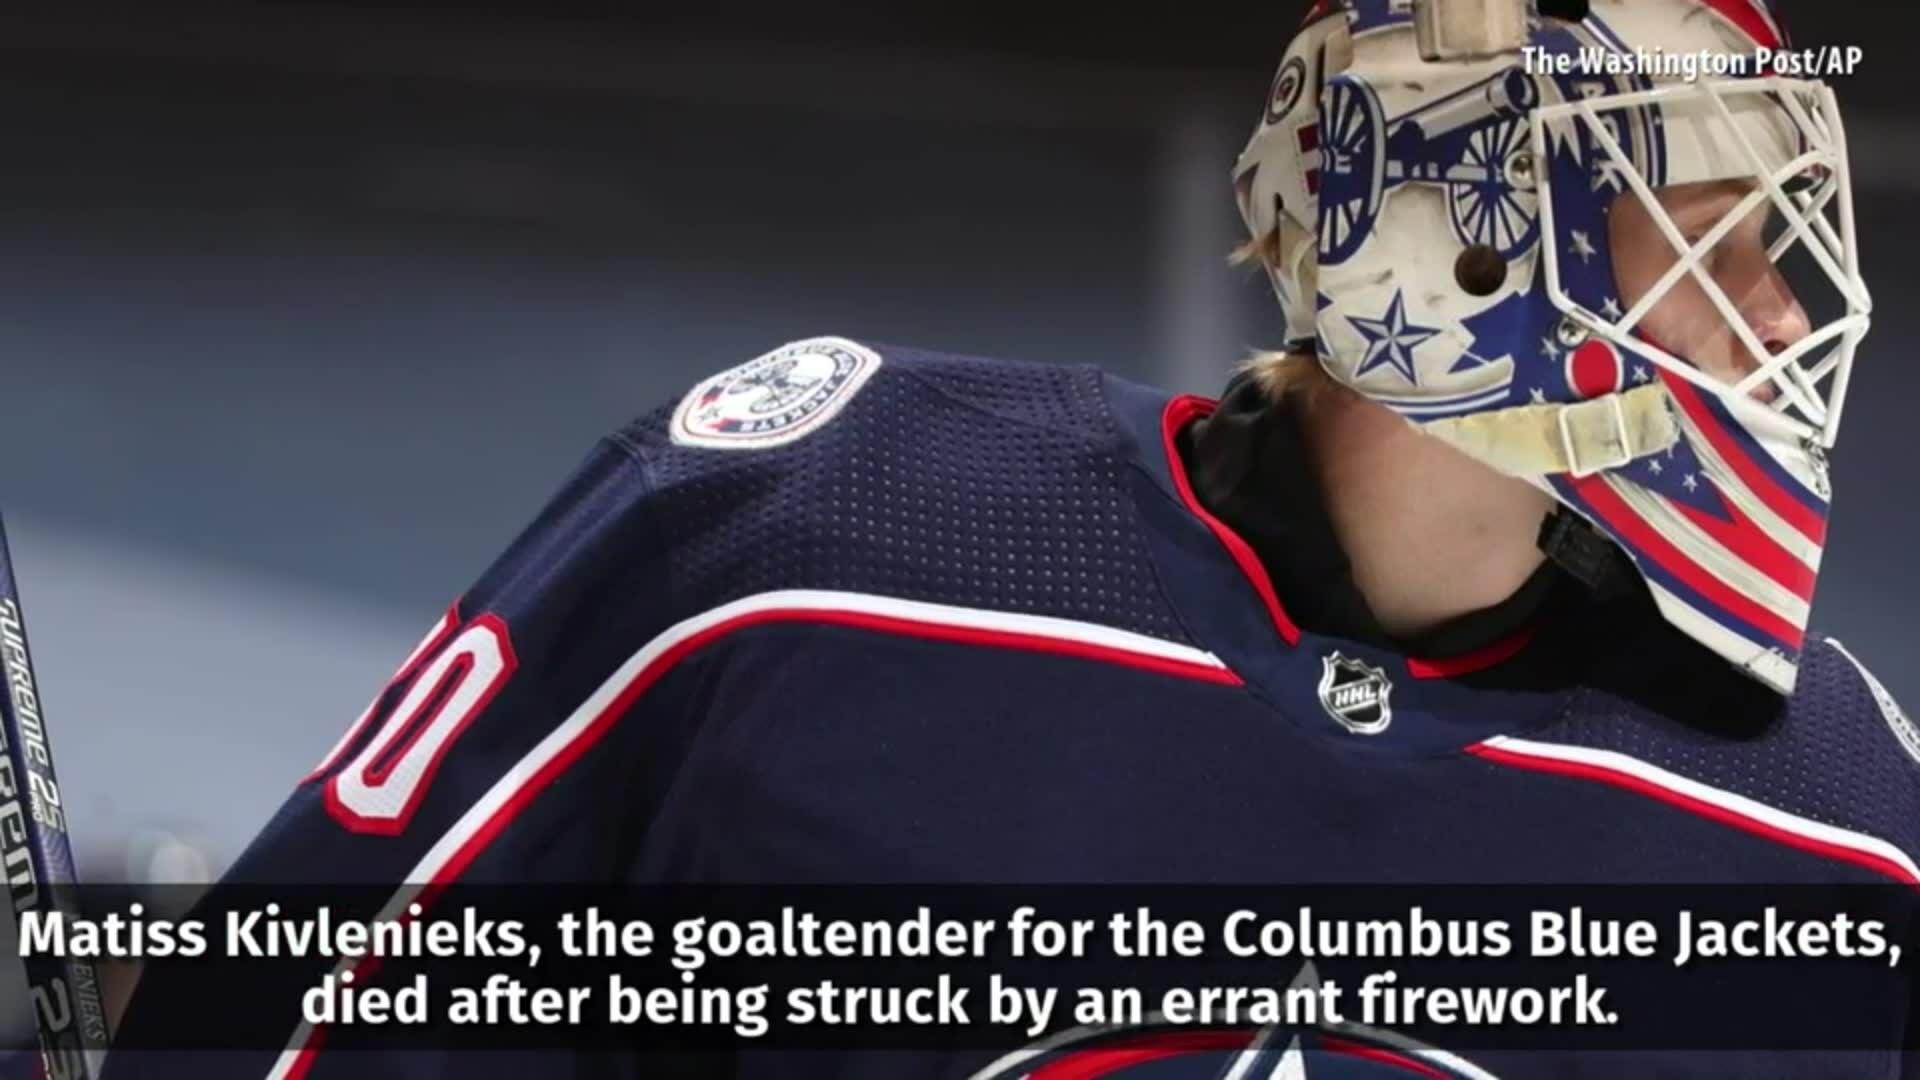 911 calls released in fireworks incident that killed NHL goalie